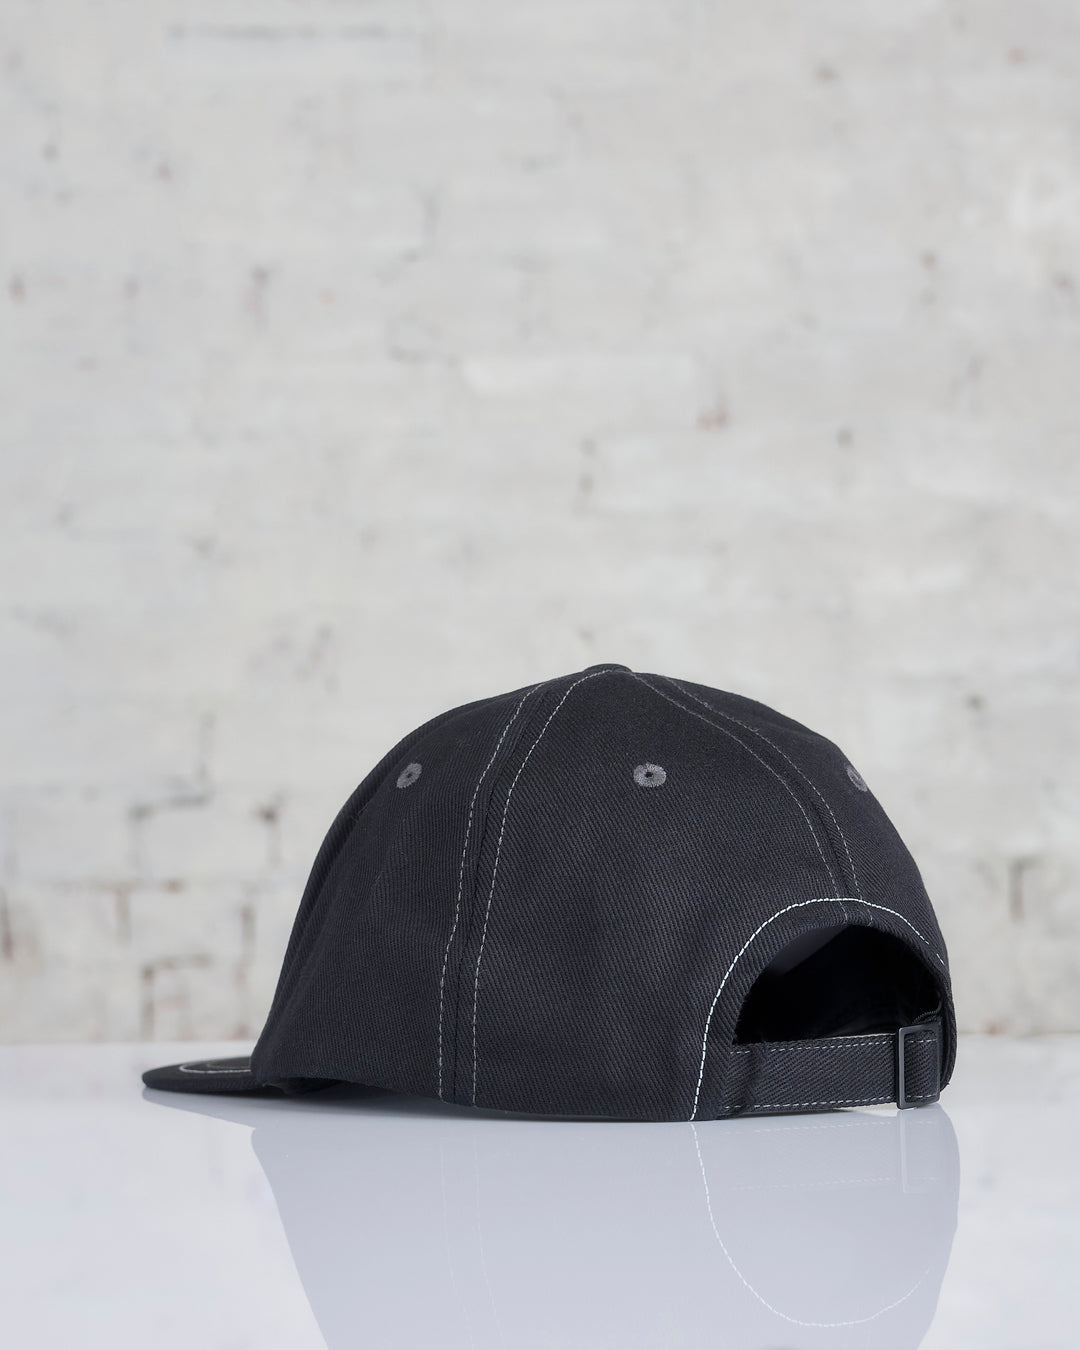 and wander Cotton Twill Cap Black